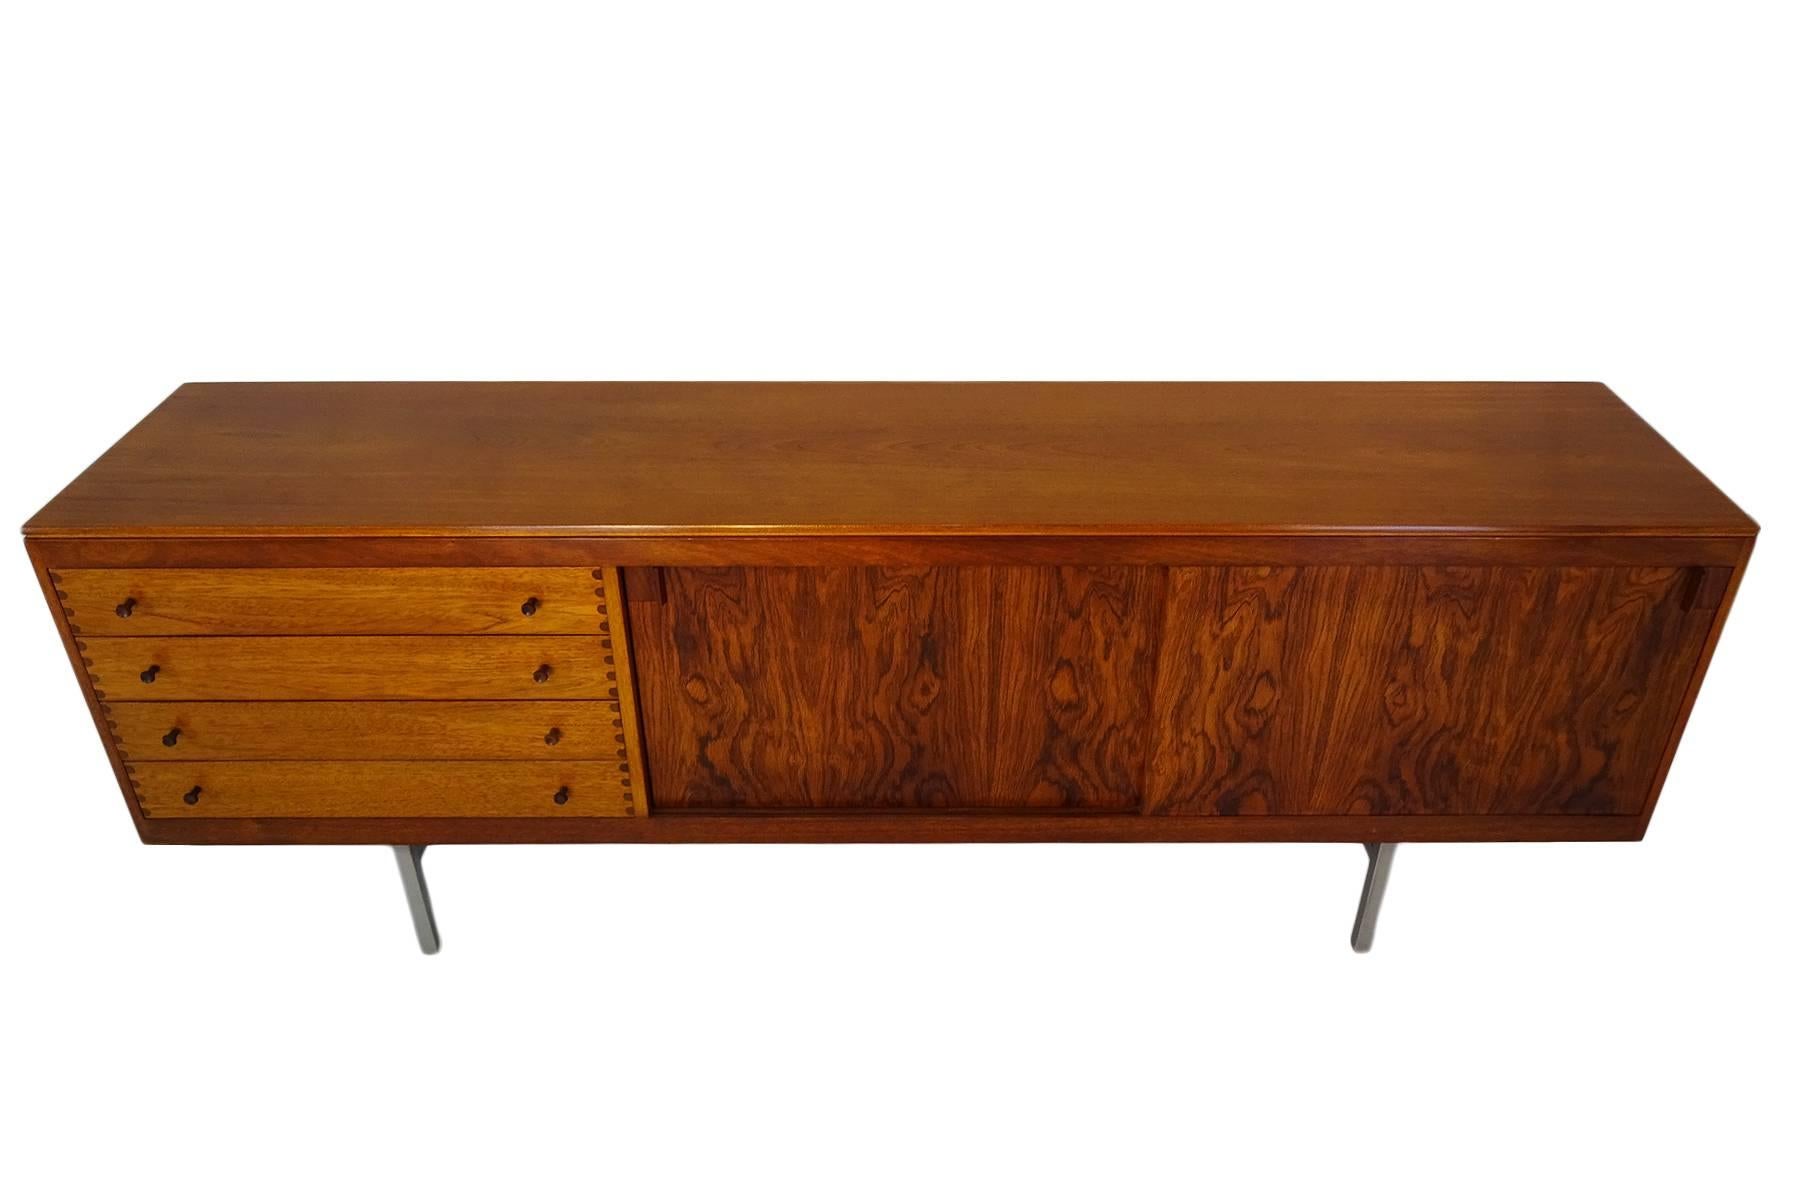 Robert Heritage is celebrated as the most awarded designer in the history of the British Design Council with numerous designs to his name including furniture, lighting, and accessories. However, he is best known for his range of sideboards/credenzas